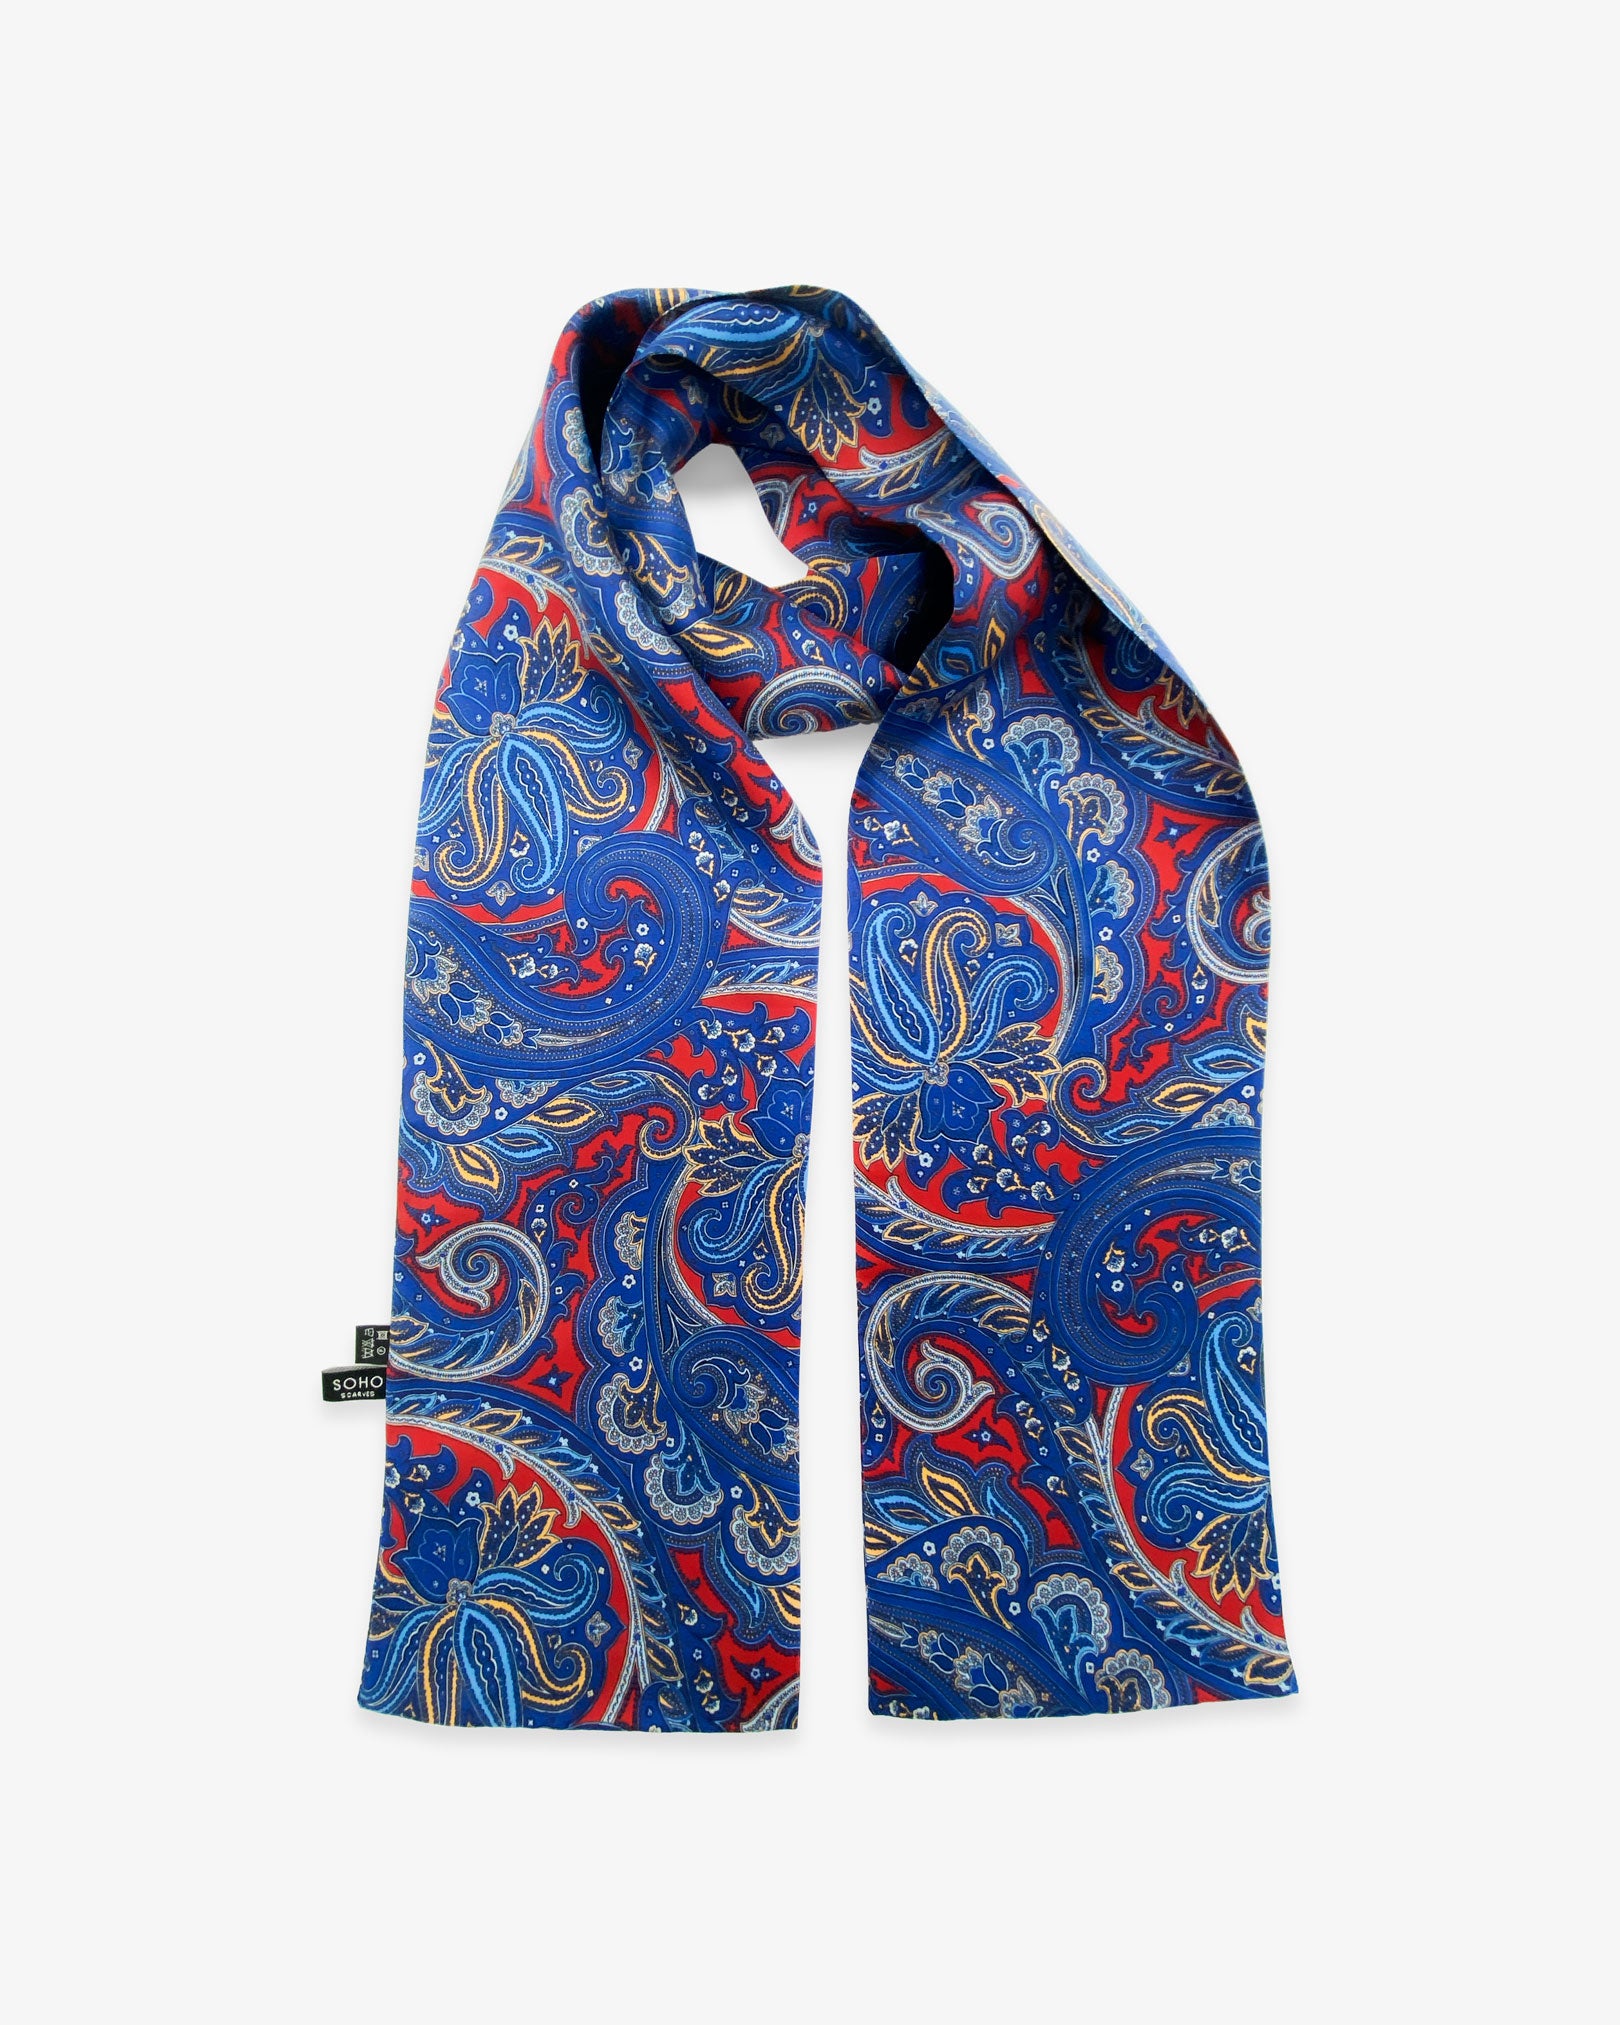 The Oxford pure silk paisley scarf looped in middle with both ends parallel showing the navy-blue paisley patterns on a deep-red ground with matching 3-inch fringe.